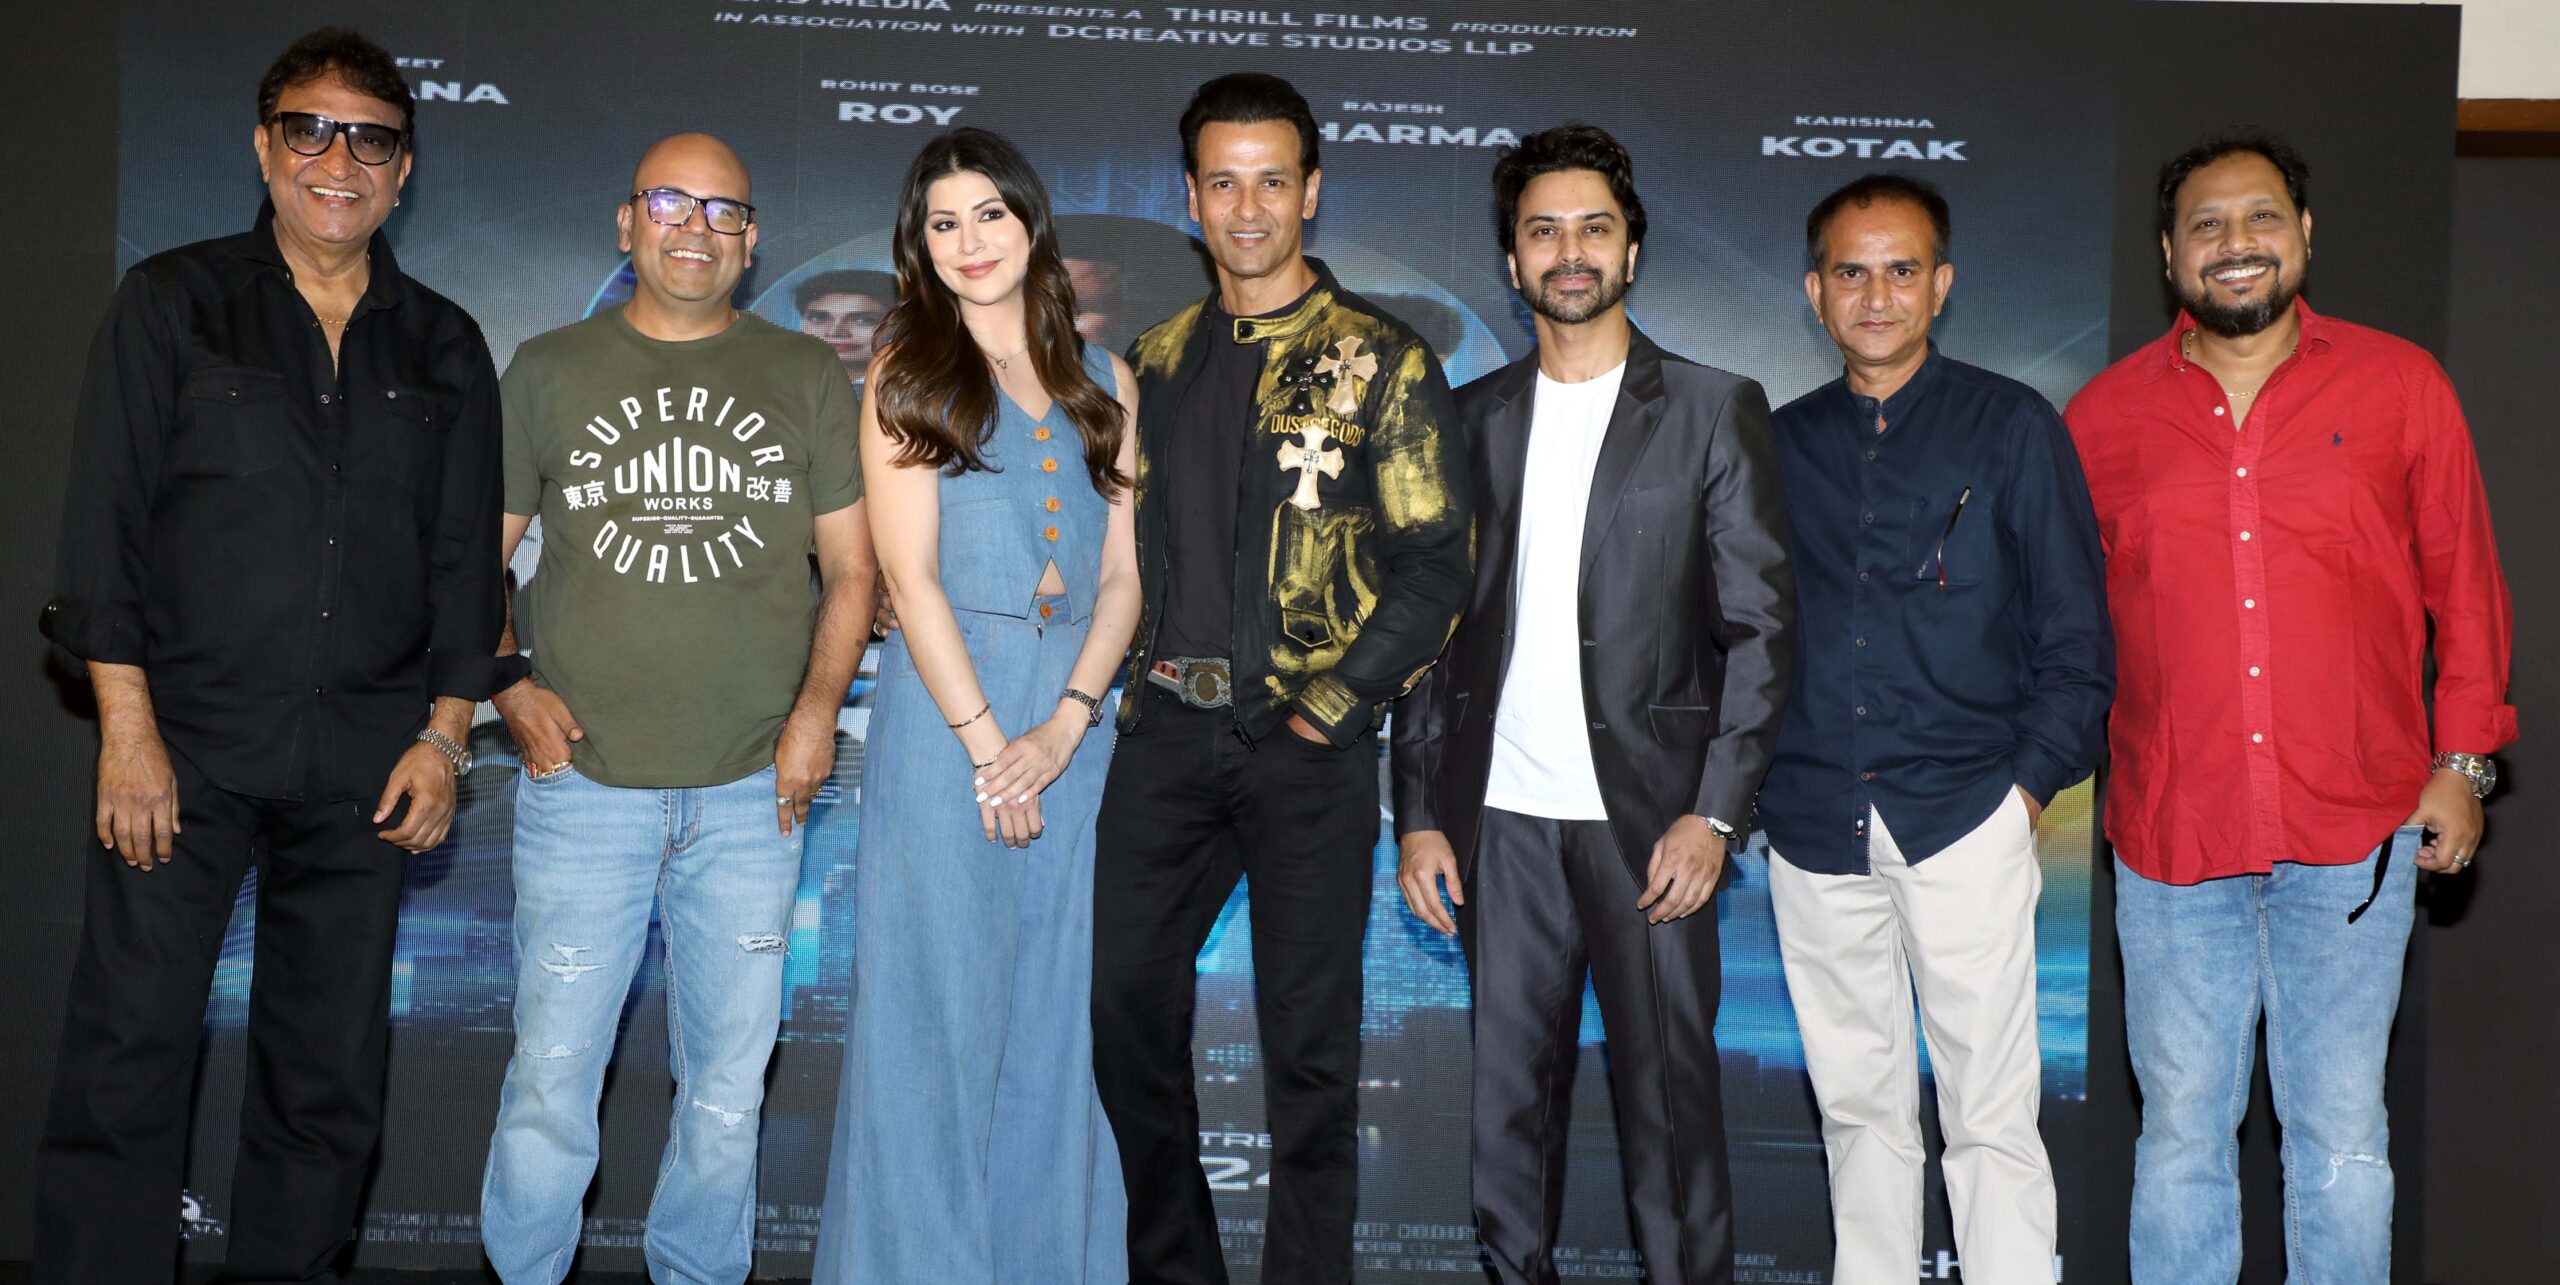 “Unveiling of ‘IRAH’: India’s First AI-Based Film Trailer Featuring Rohit Bose Roy and Karishma Kotak”